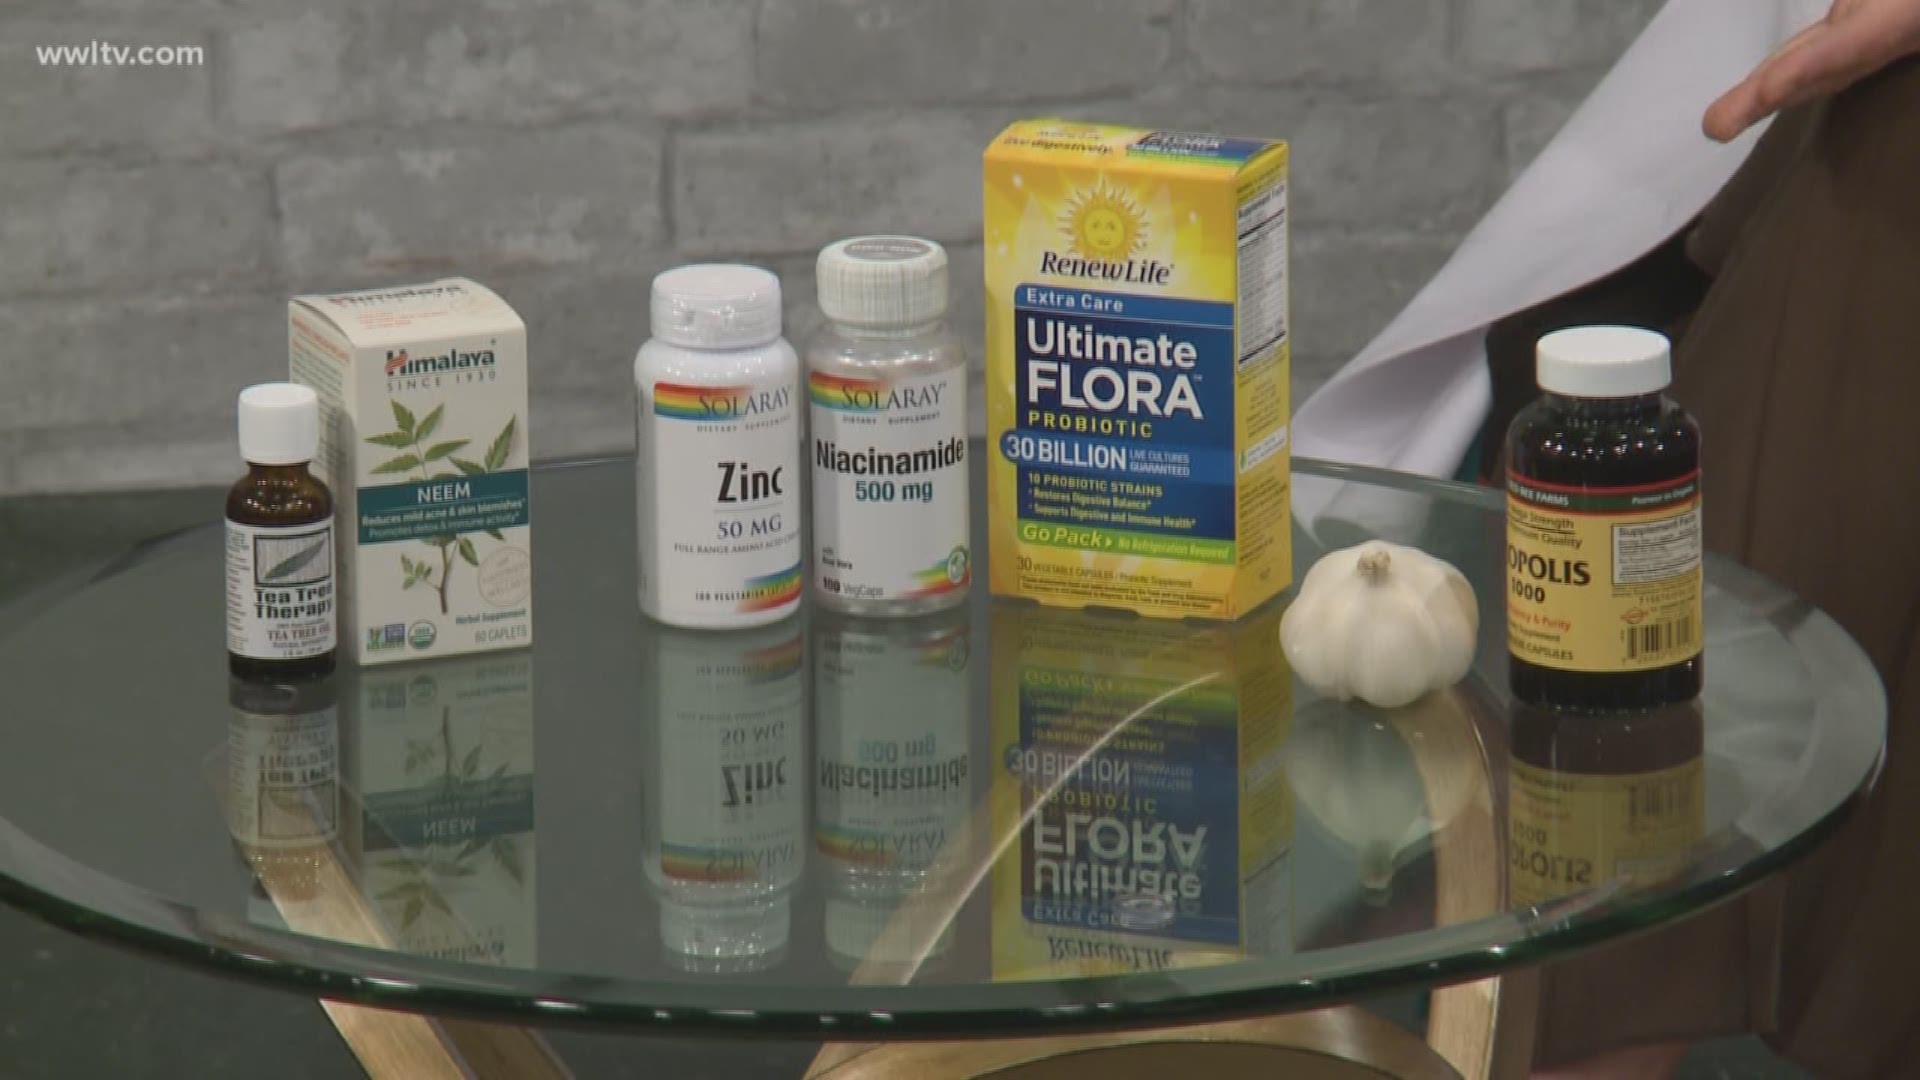 Dr. Mamina Turegano has some good home remedies to help school age children with their skin problems